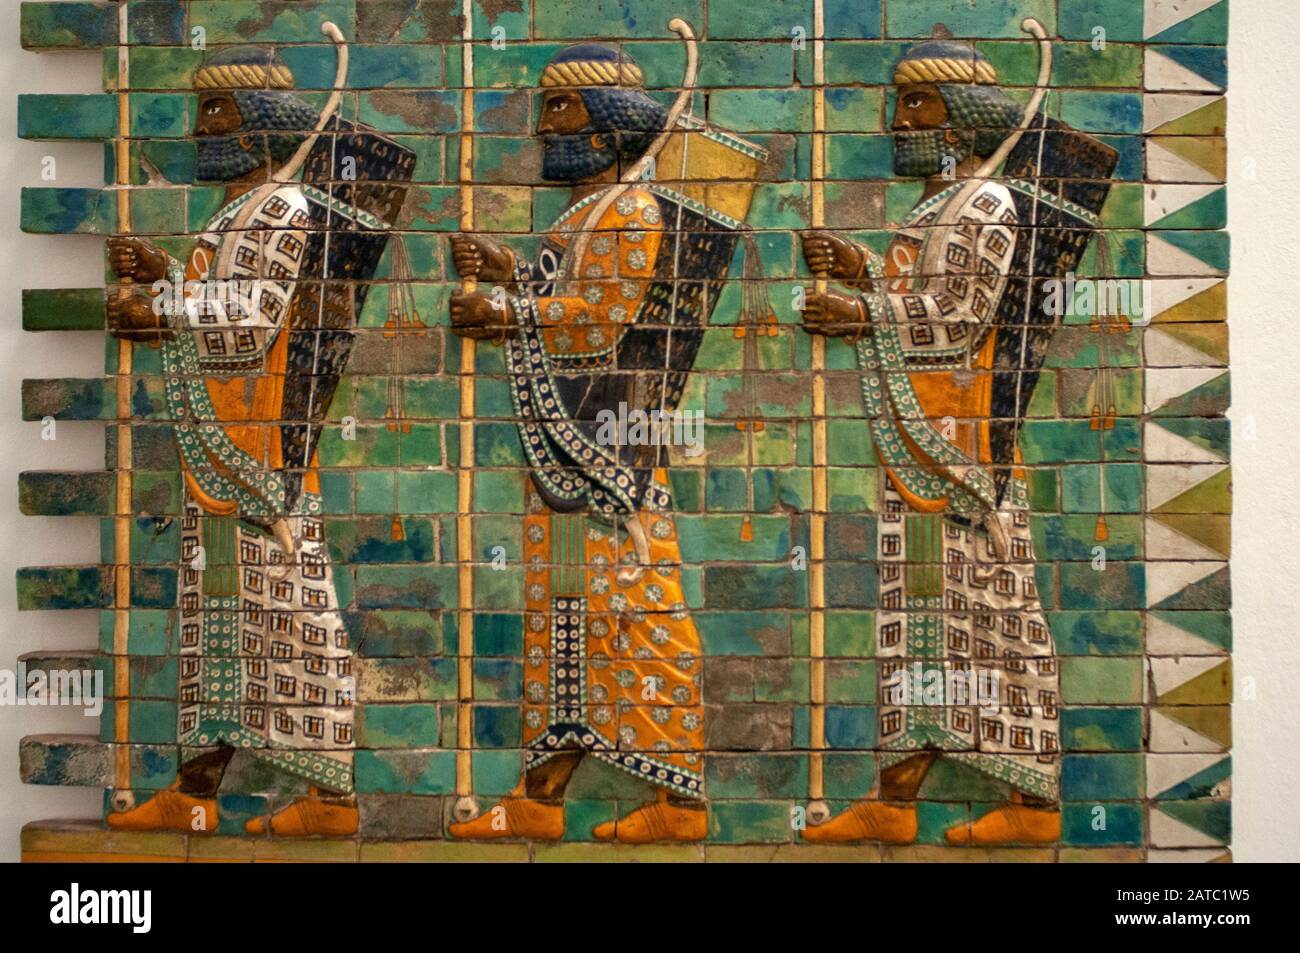 The Babylonian archers. These men with bows and spears are depicted at the Ishtar Gate, one of the gates of ancient Babylon. Pergamon Museum, Museumsi Stock Photo